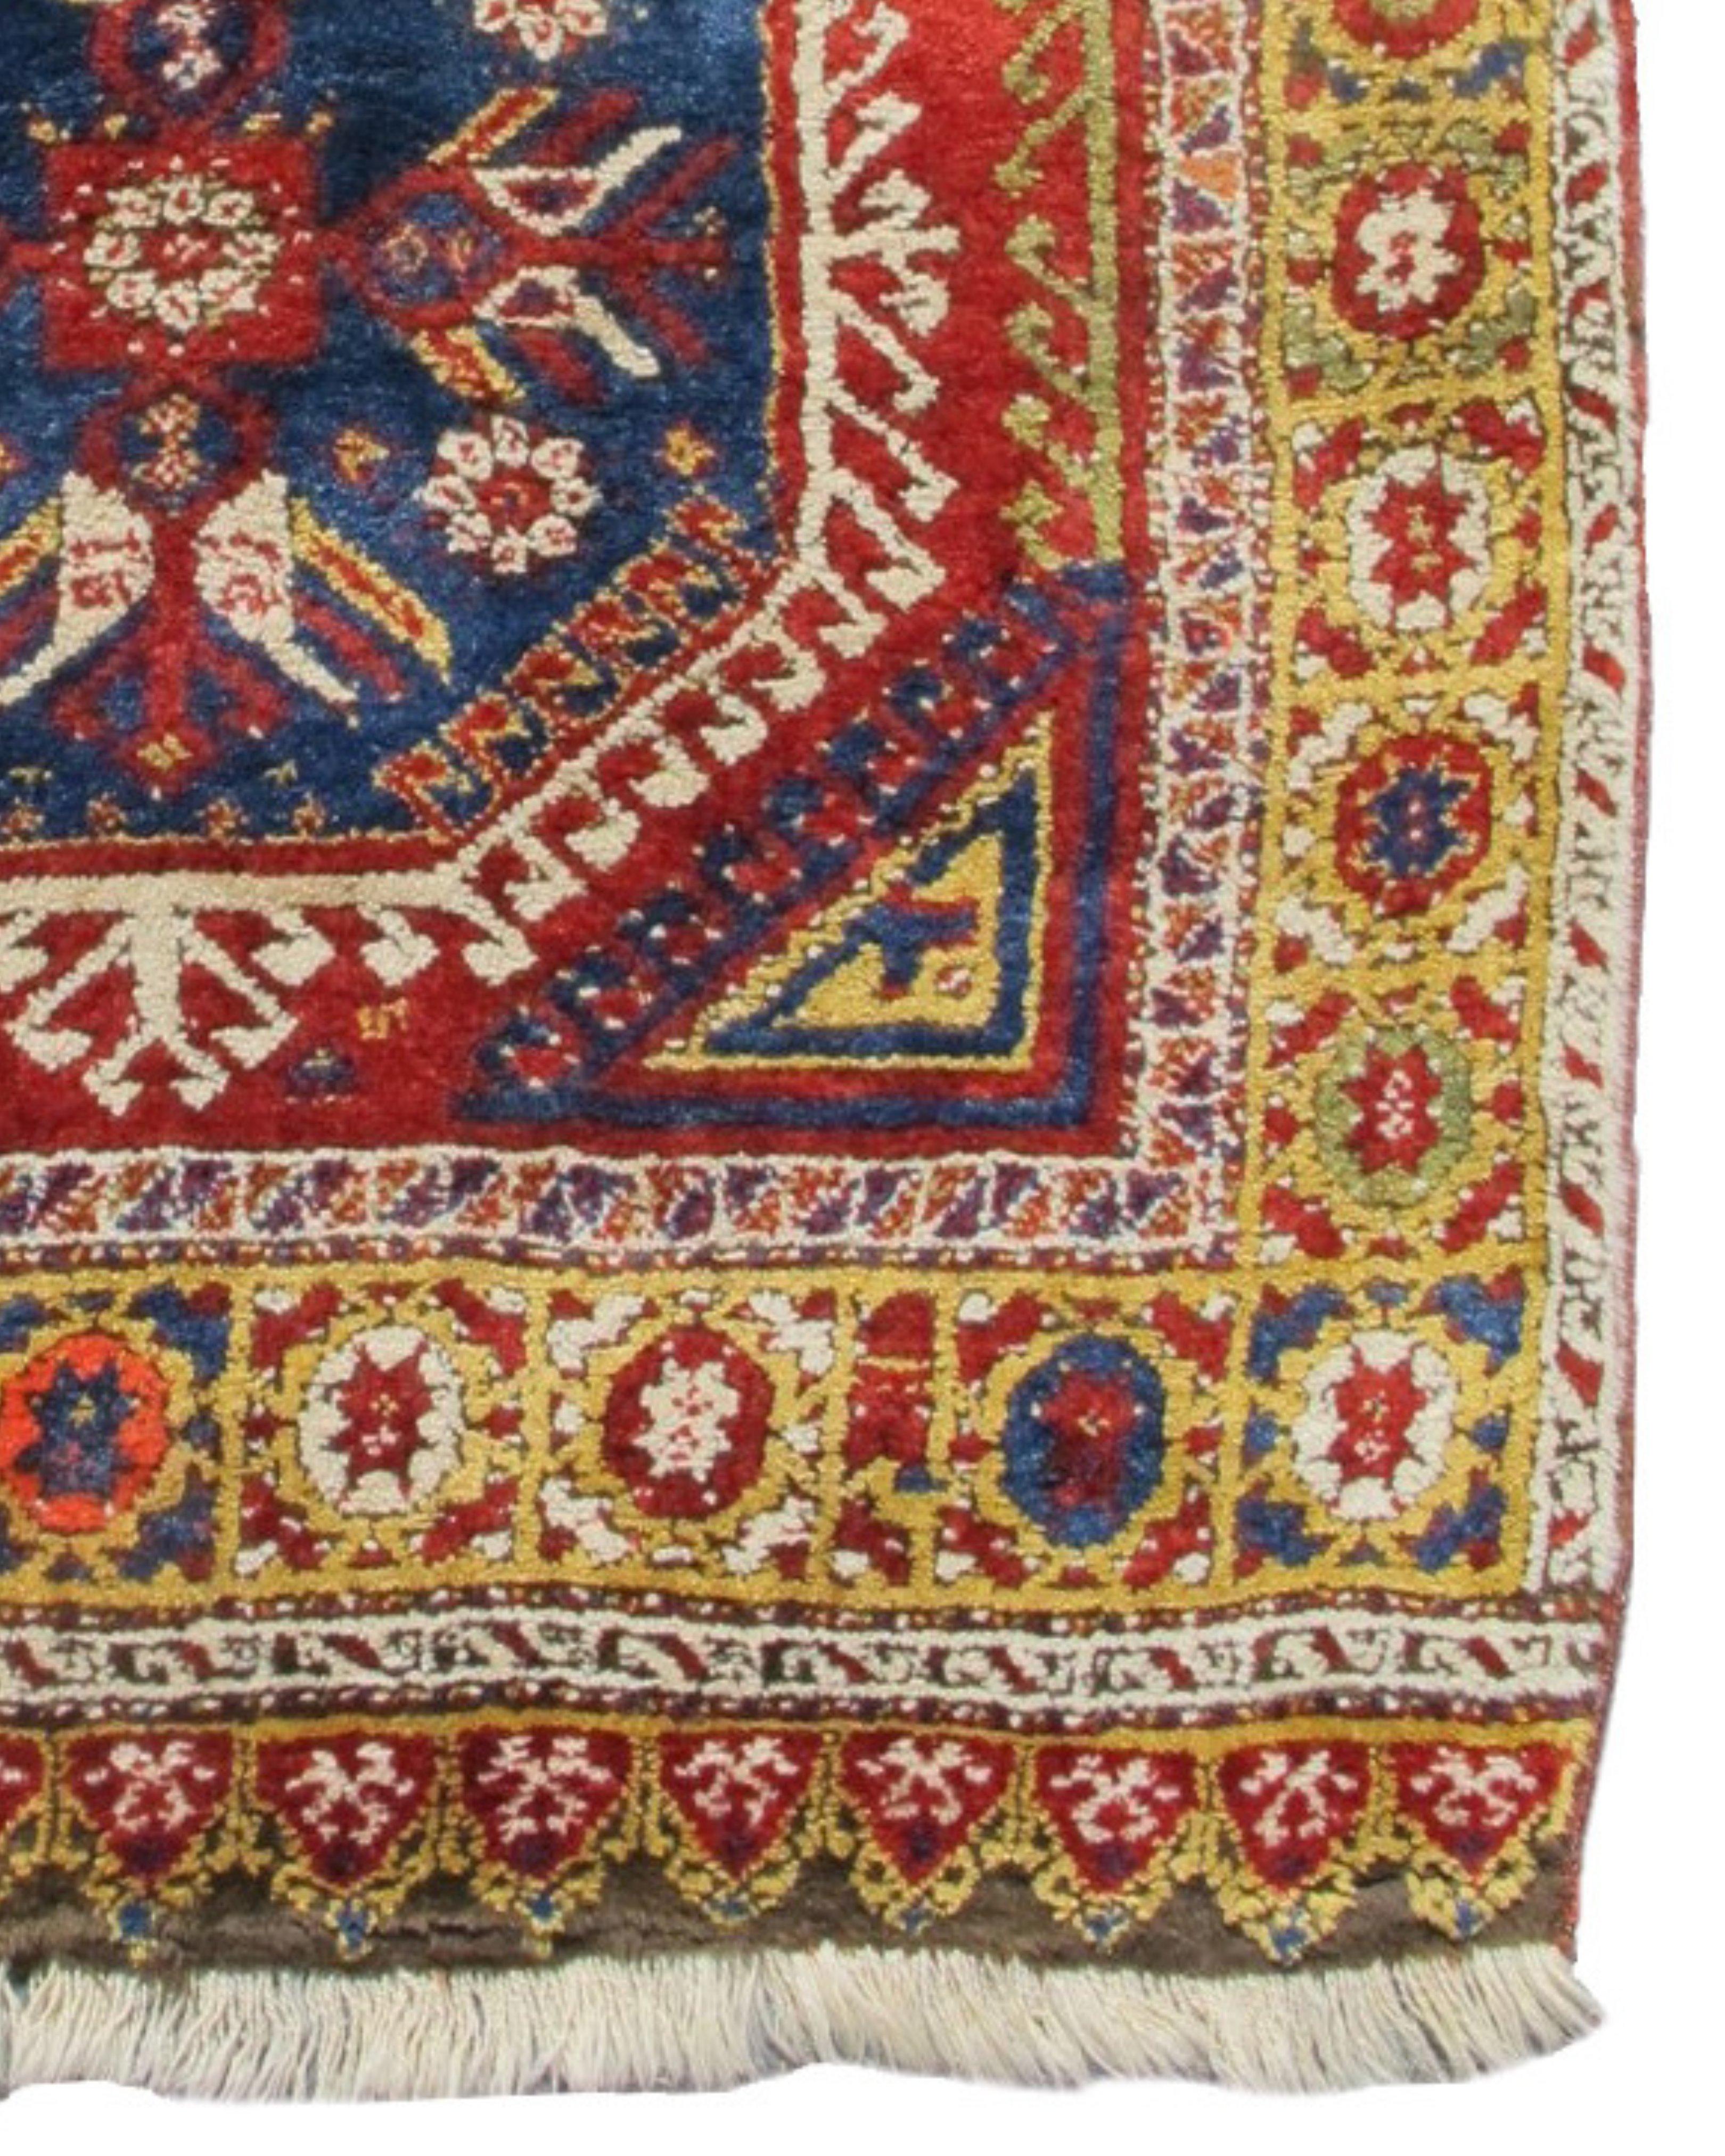 Antique Konya Bozkir Yatak Rug, Late 19th century In Excellent Condition For Sale In San Francisco, CA